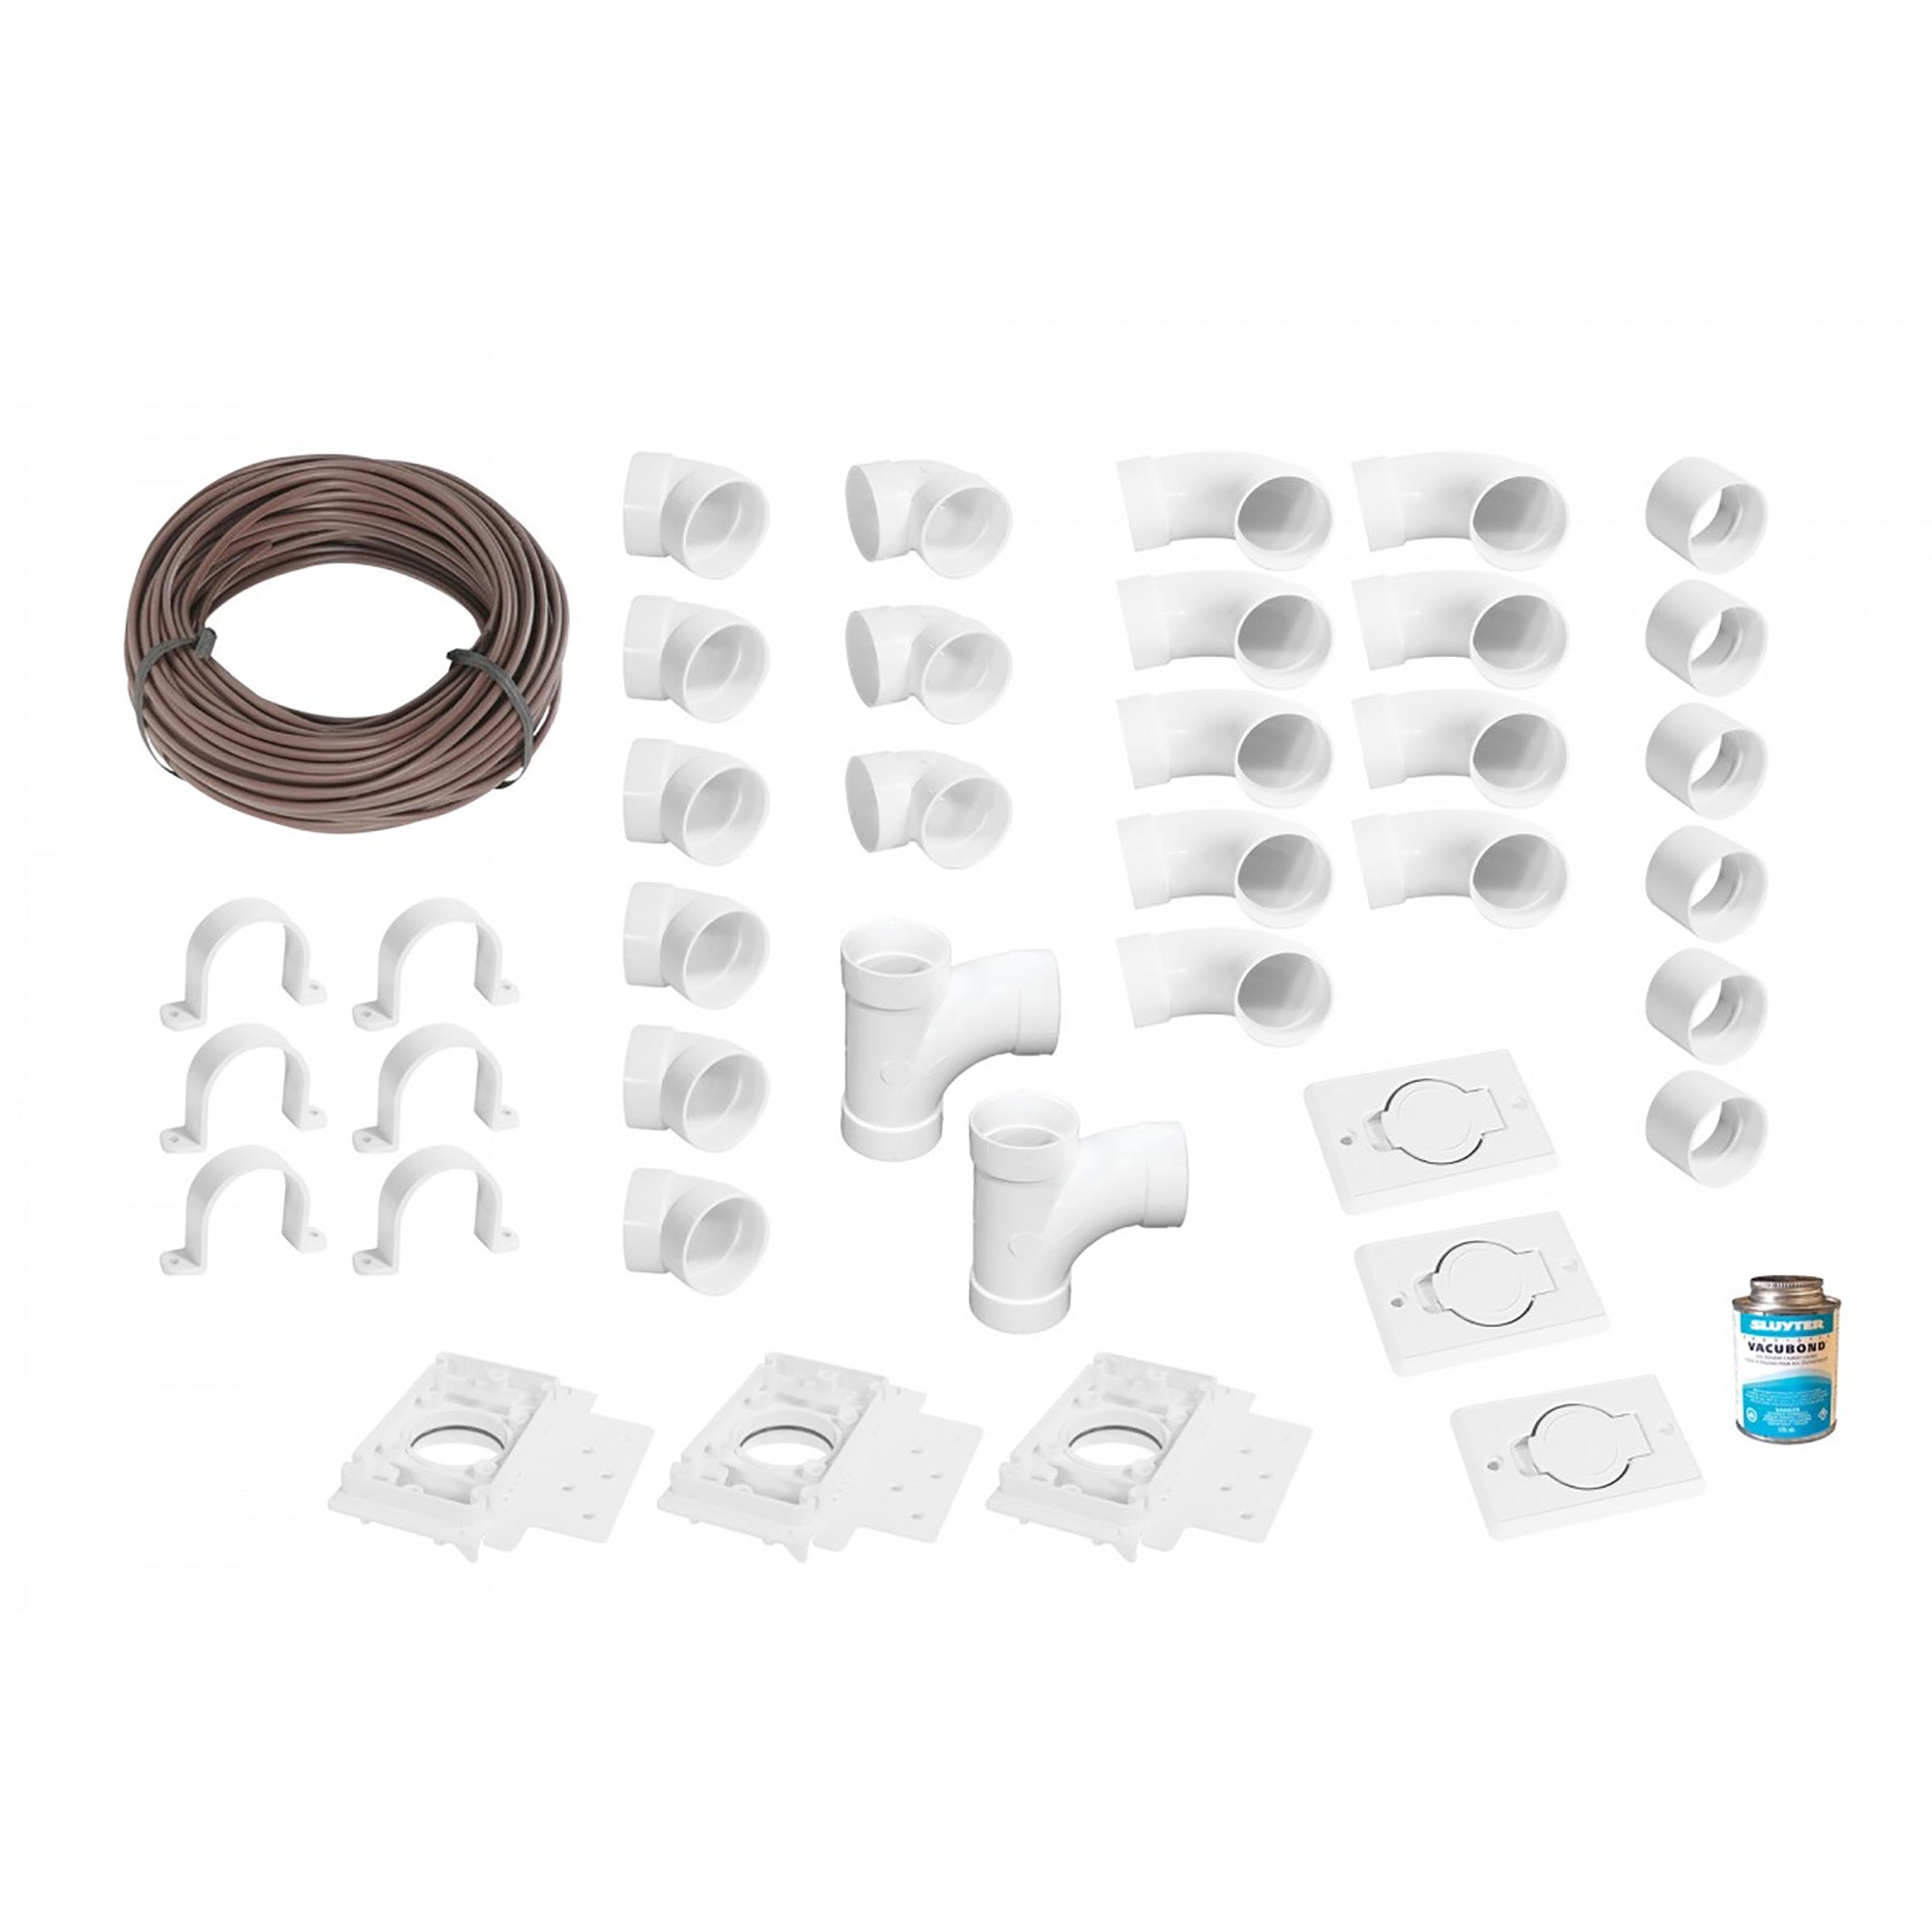 Central Vacuum Installation Kit - 3 Outlets with Accessories